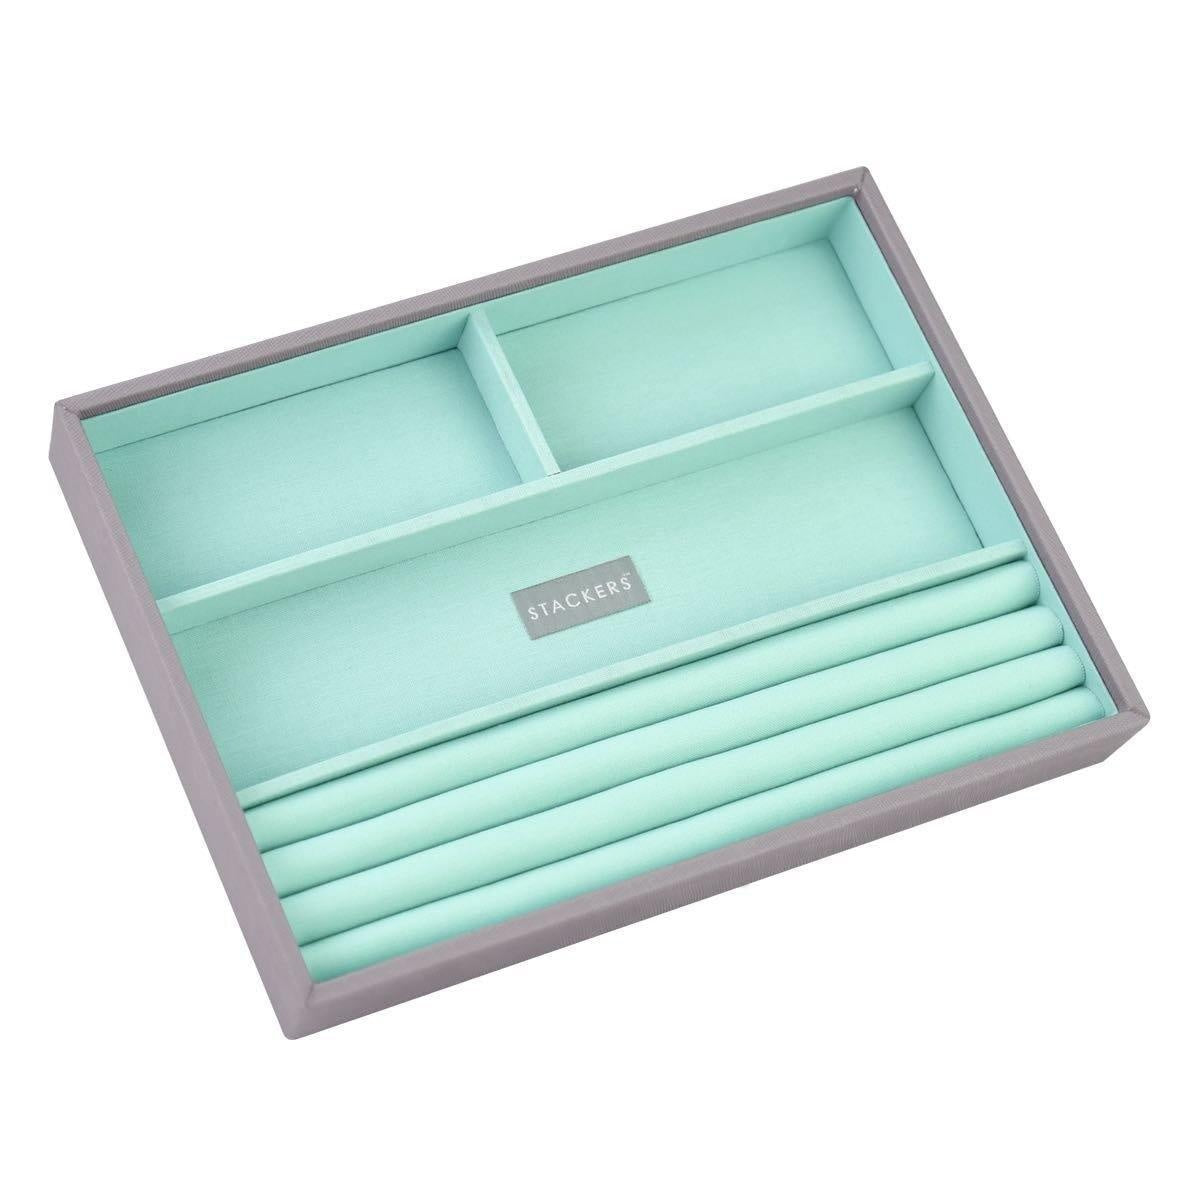 Dove Grey with Mint Interior Classic Size Stackers Jewellery Box Rings layer Tray